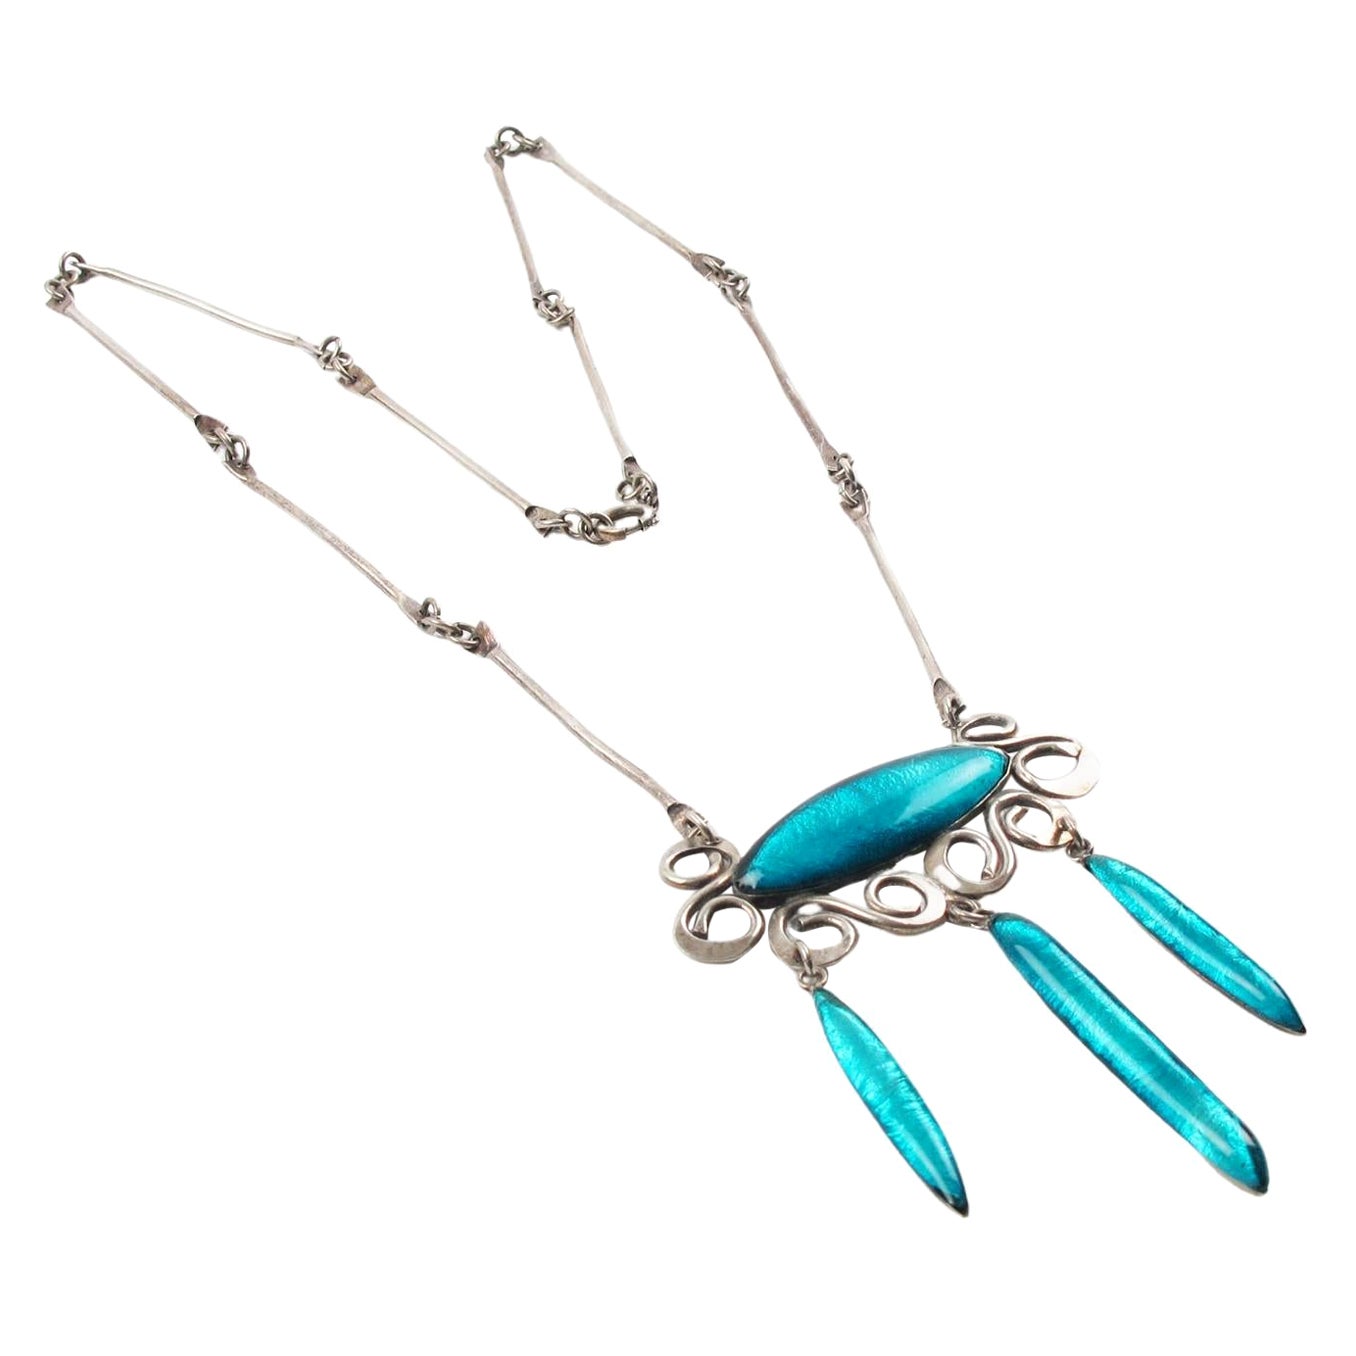 Mid-Century Silvered Metal Necklace with Electric Blue Poured Glass Pendant